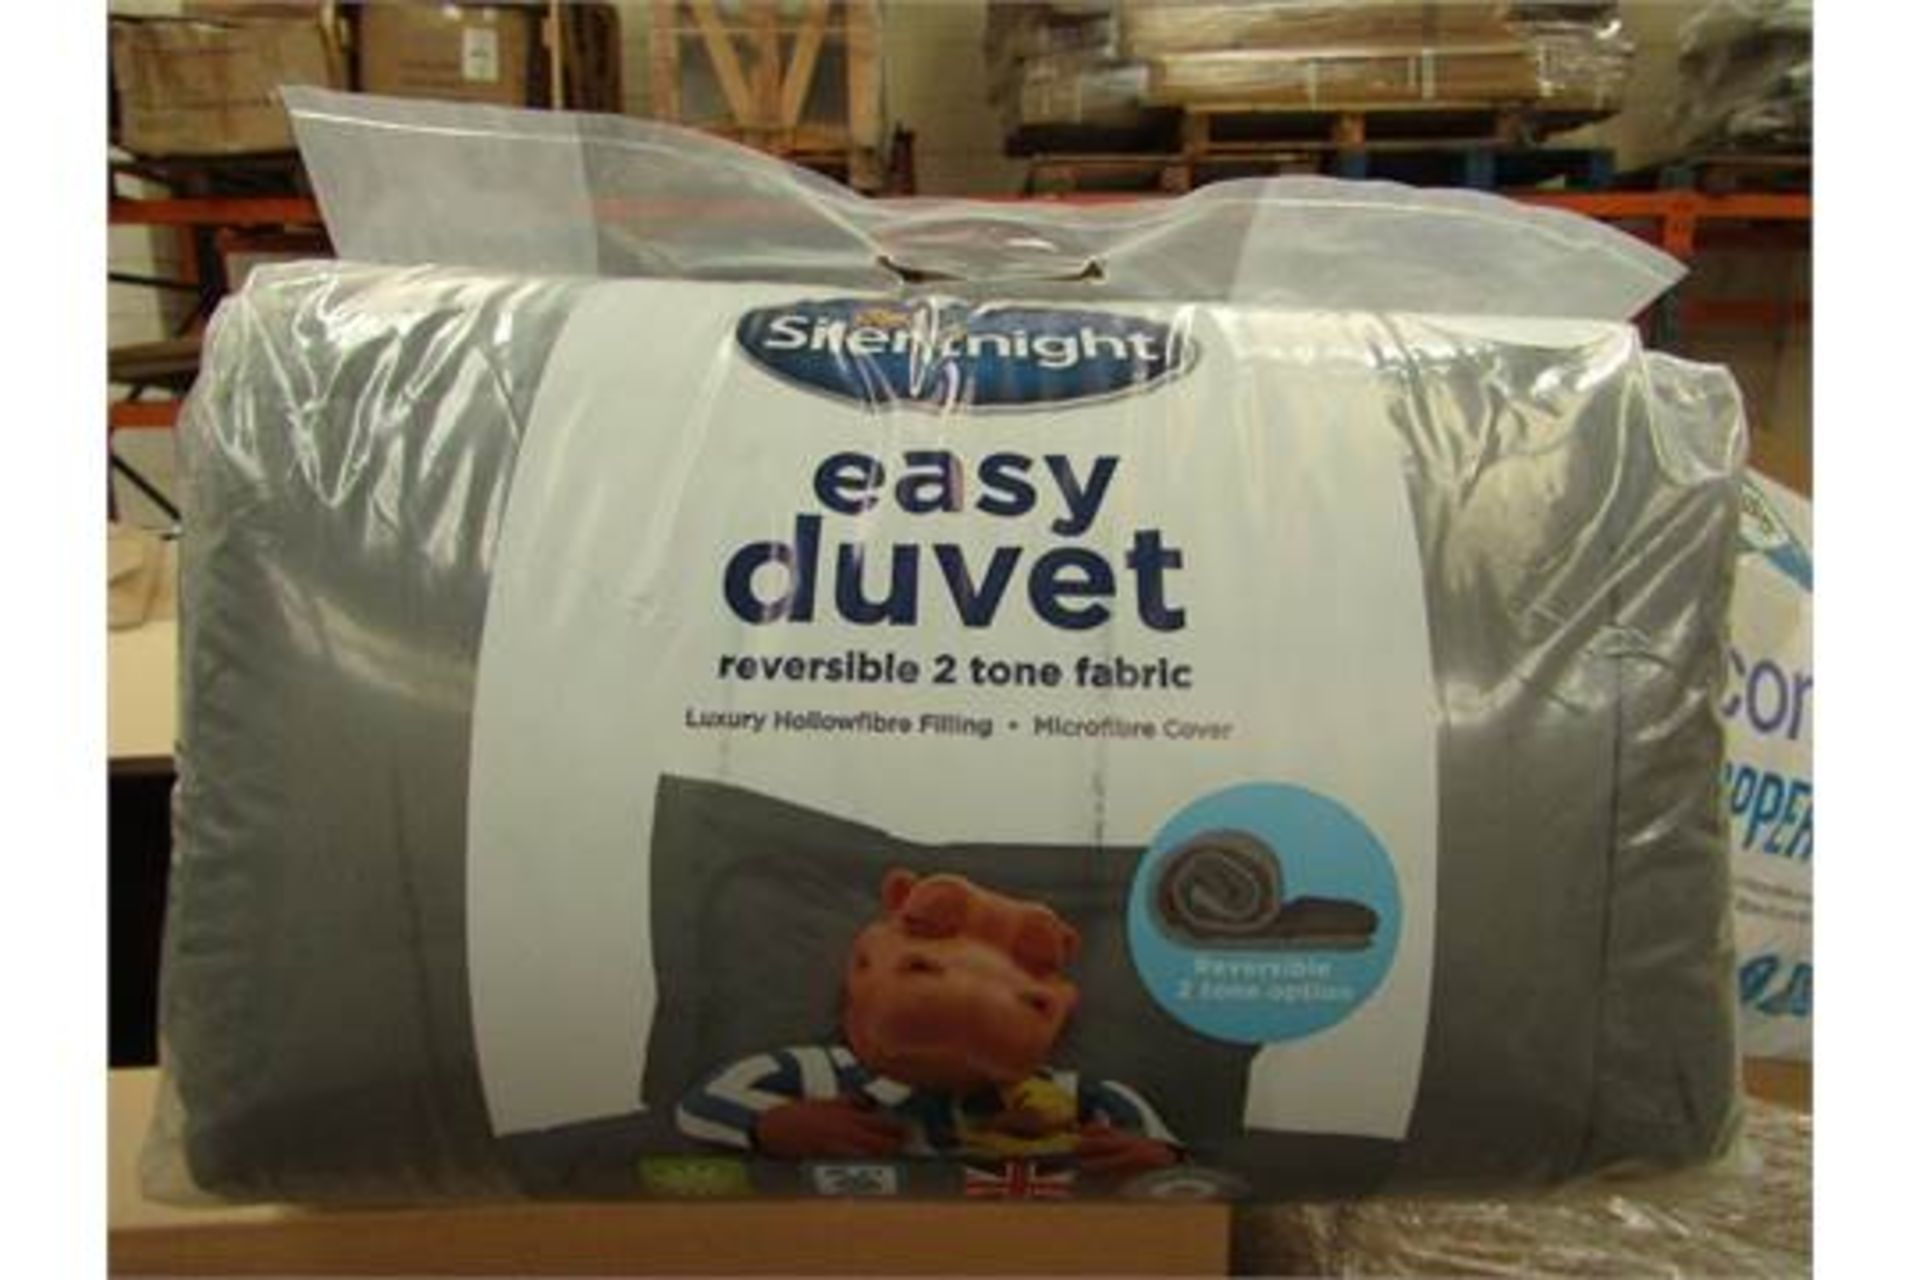 Silentnight easy duvets, reversible 2 tone fabric, 10.5 Tog Single size, new in packaging.